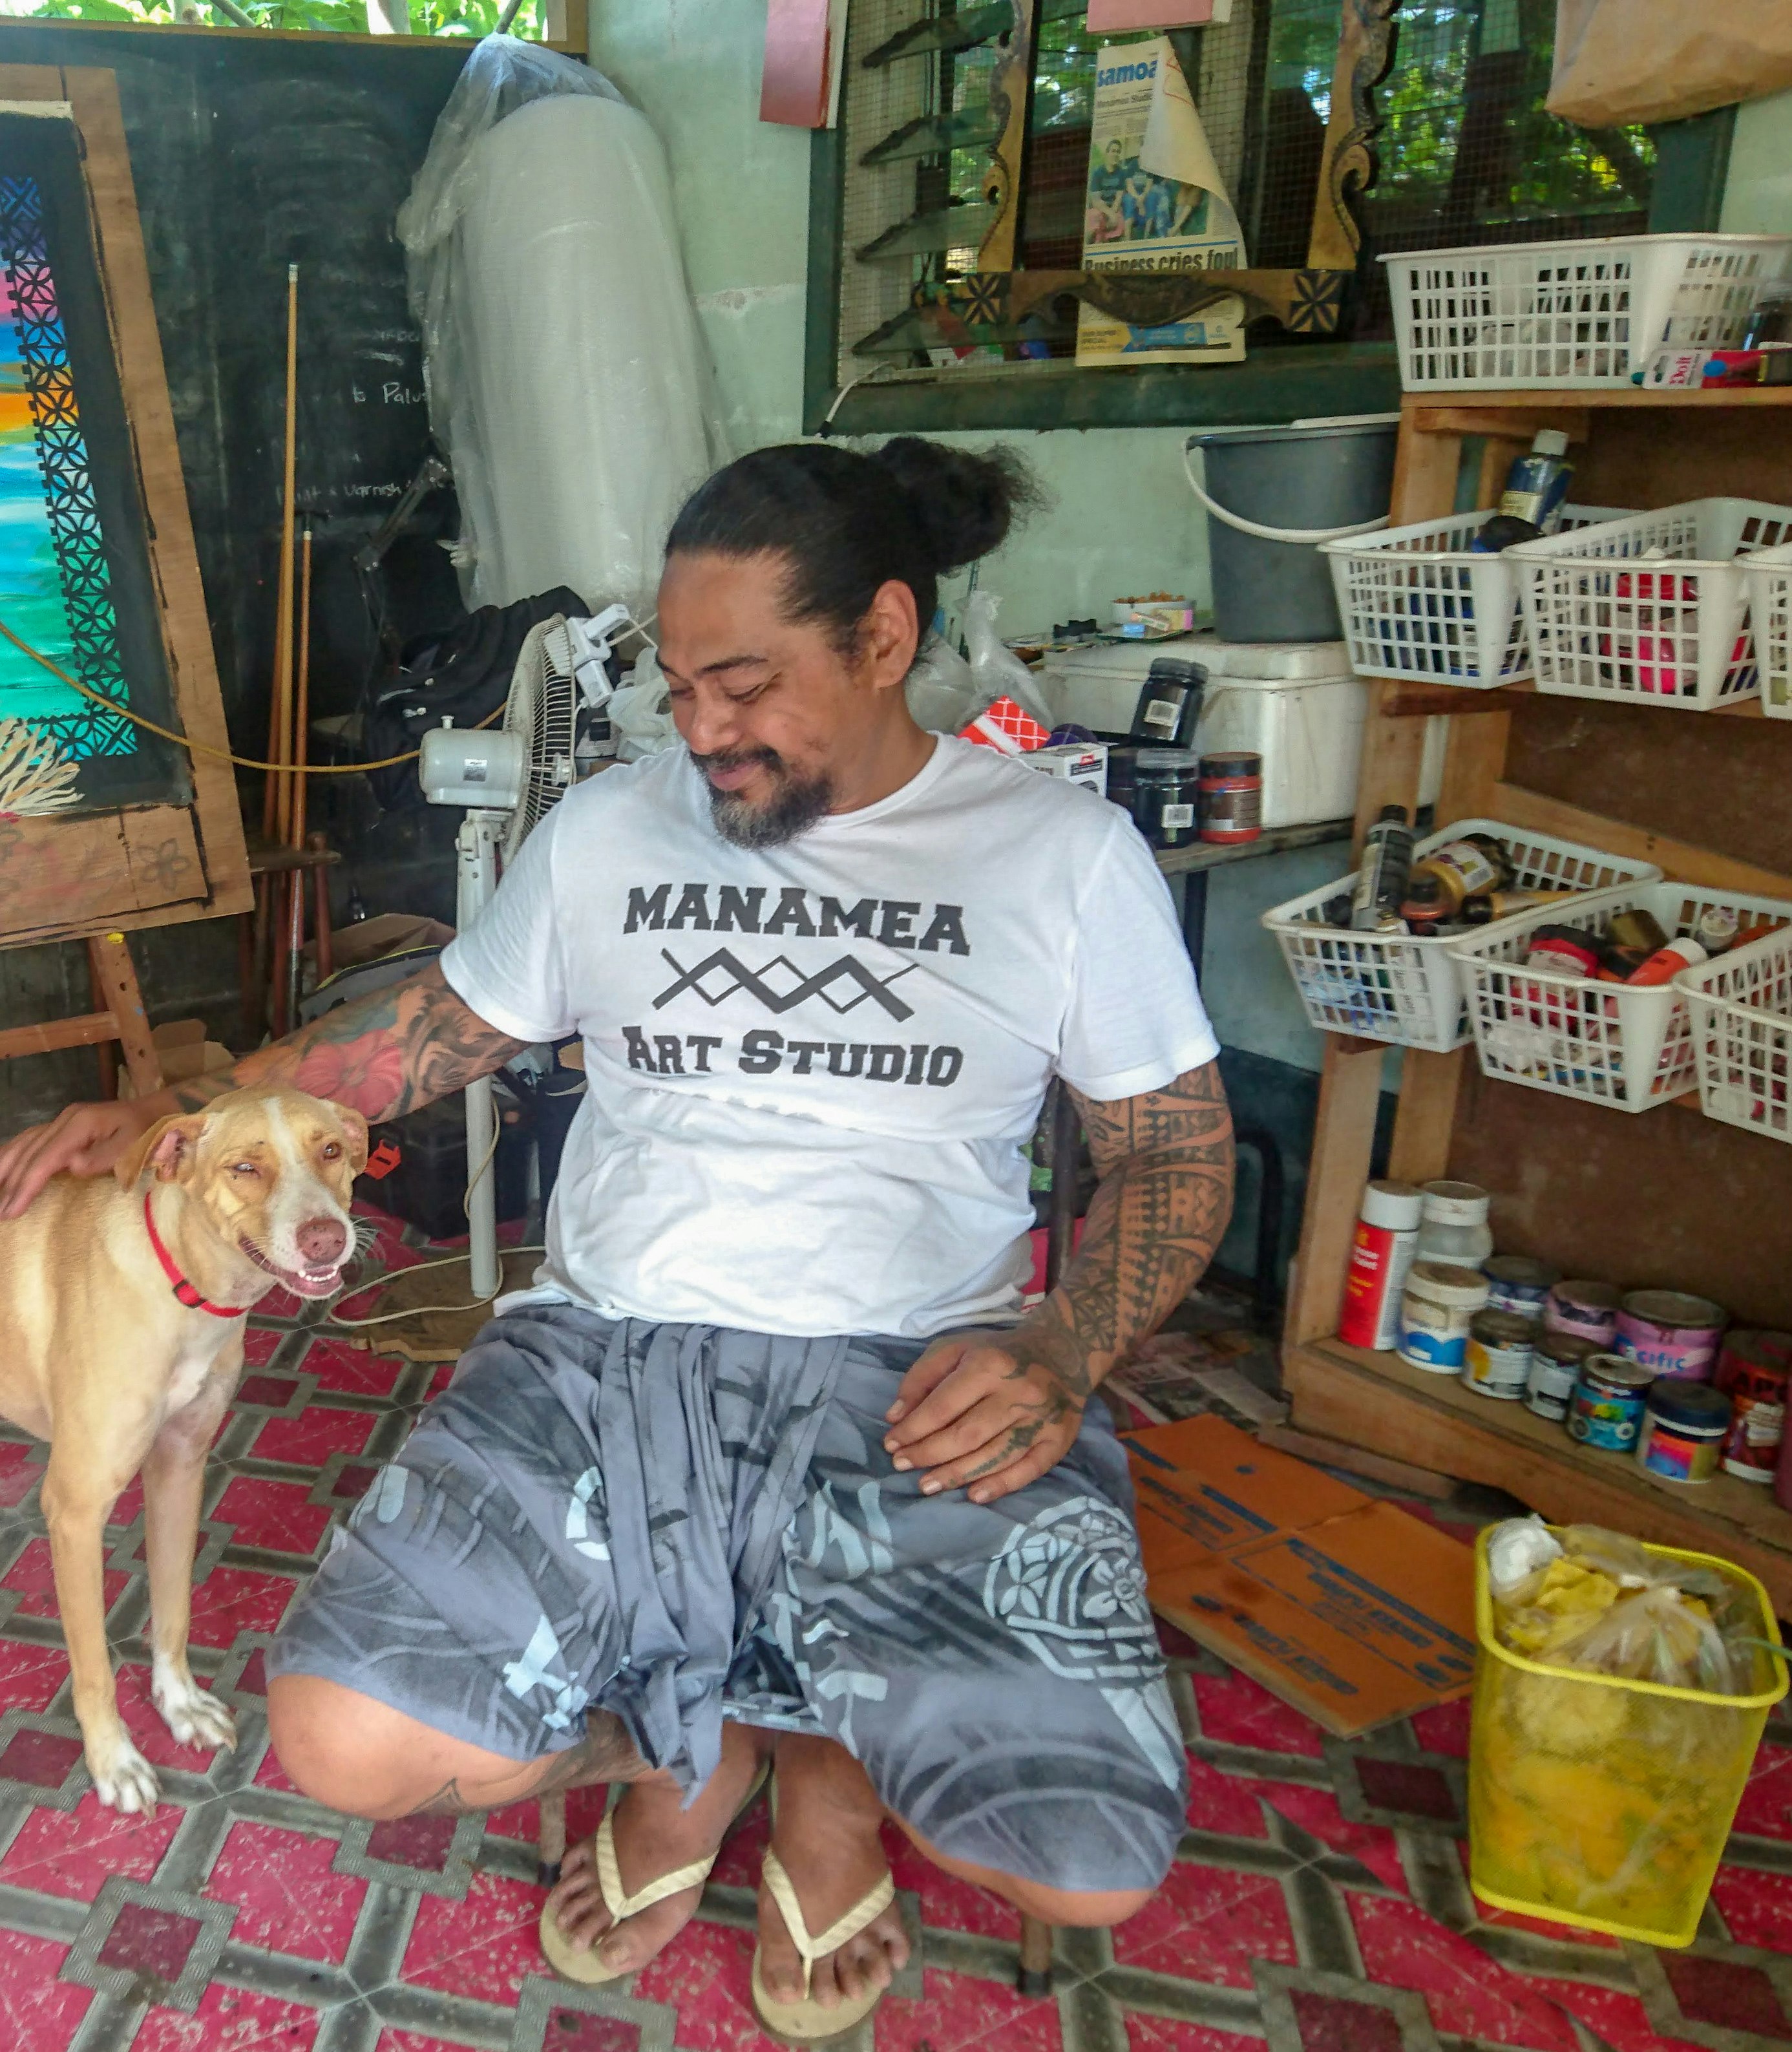 A Pasifika male-presenting figure wearing a white shirt printed with 'Manamea Art Studio', sitting down and patting a dog next to him. On his left are storage containers filled with paints and other art supplies.